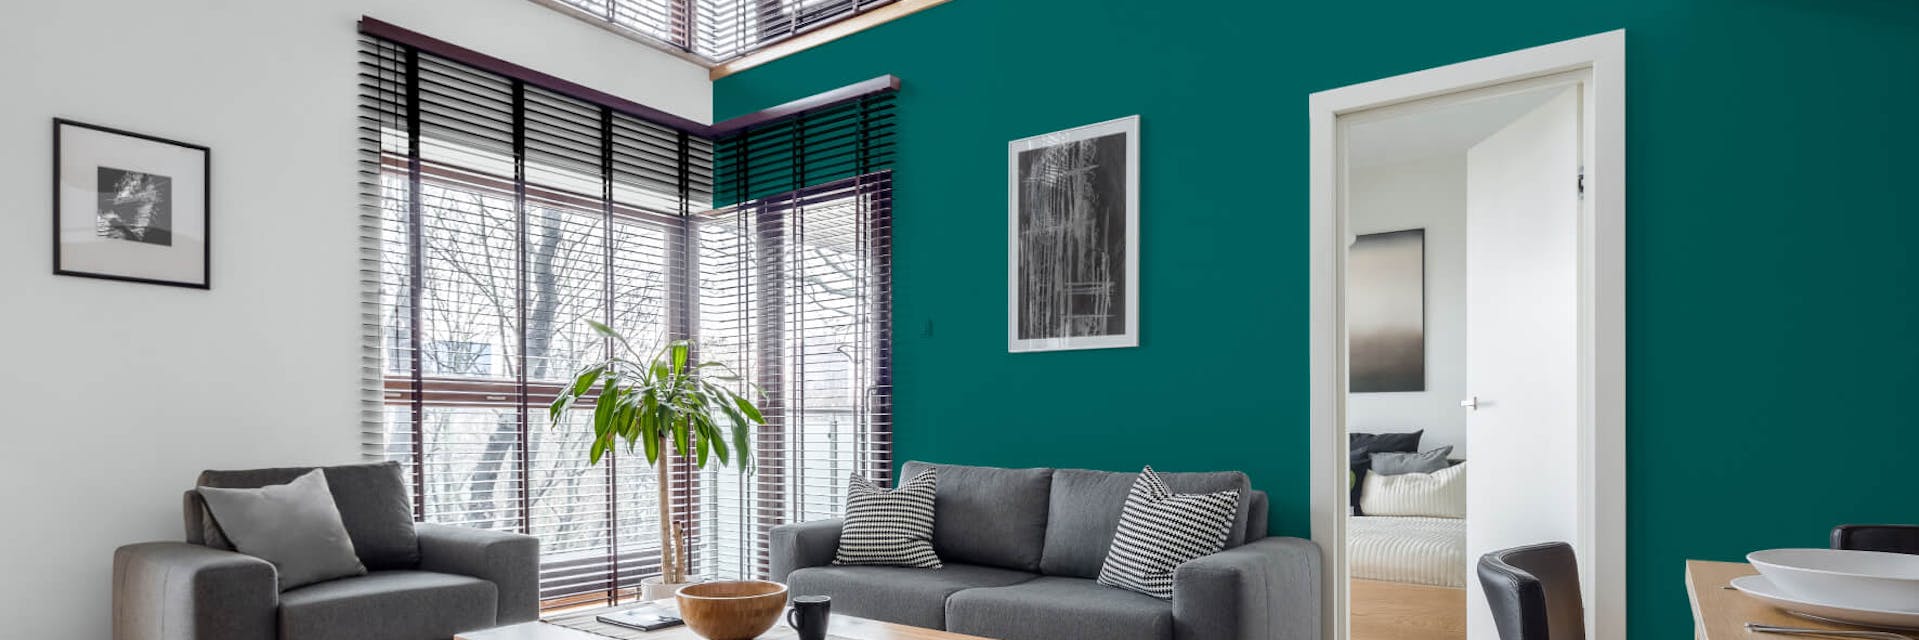 Living room painted with a Johnstone's turquoise paint colour 